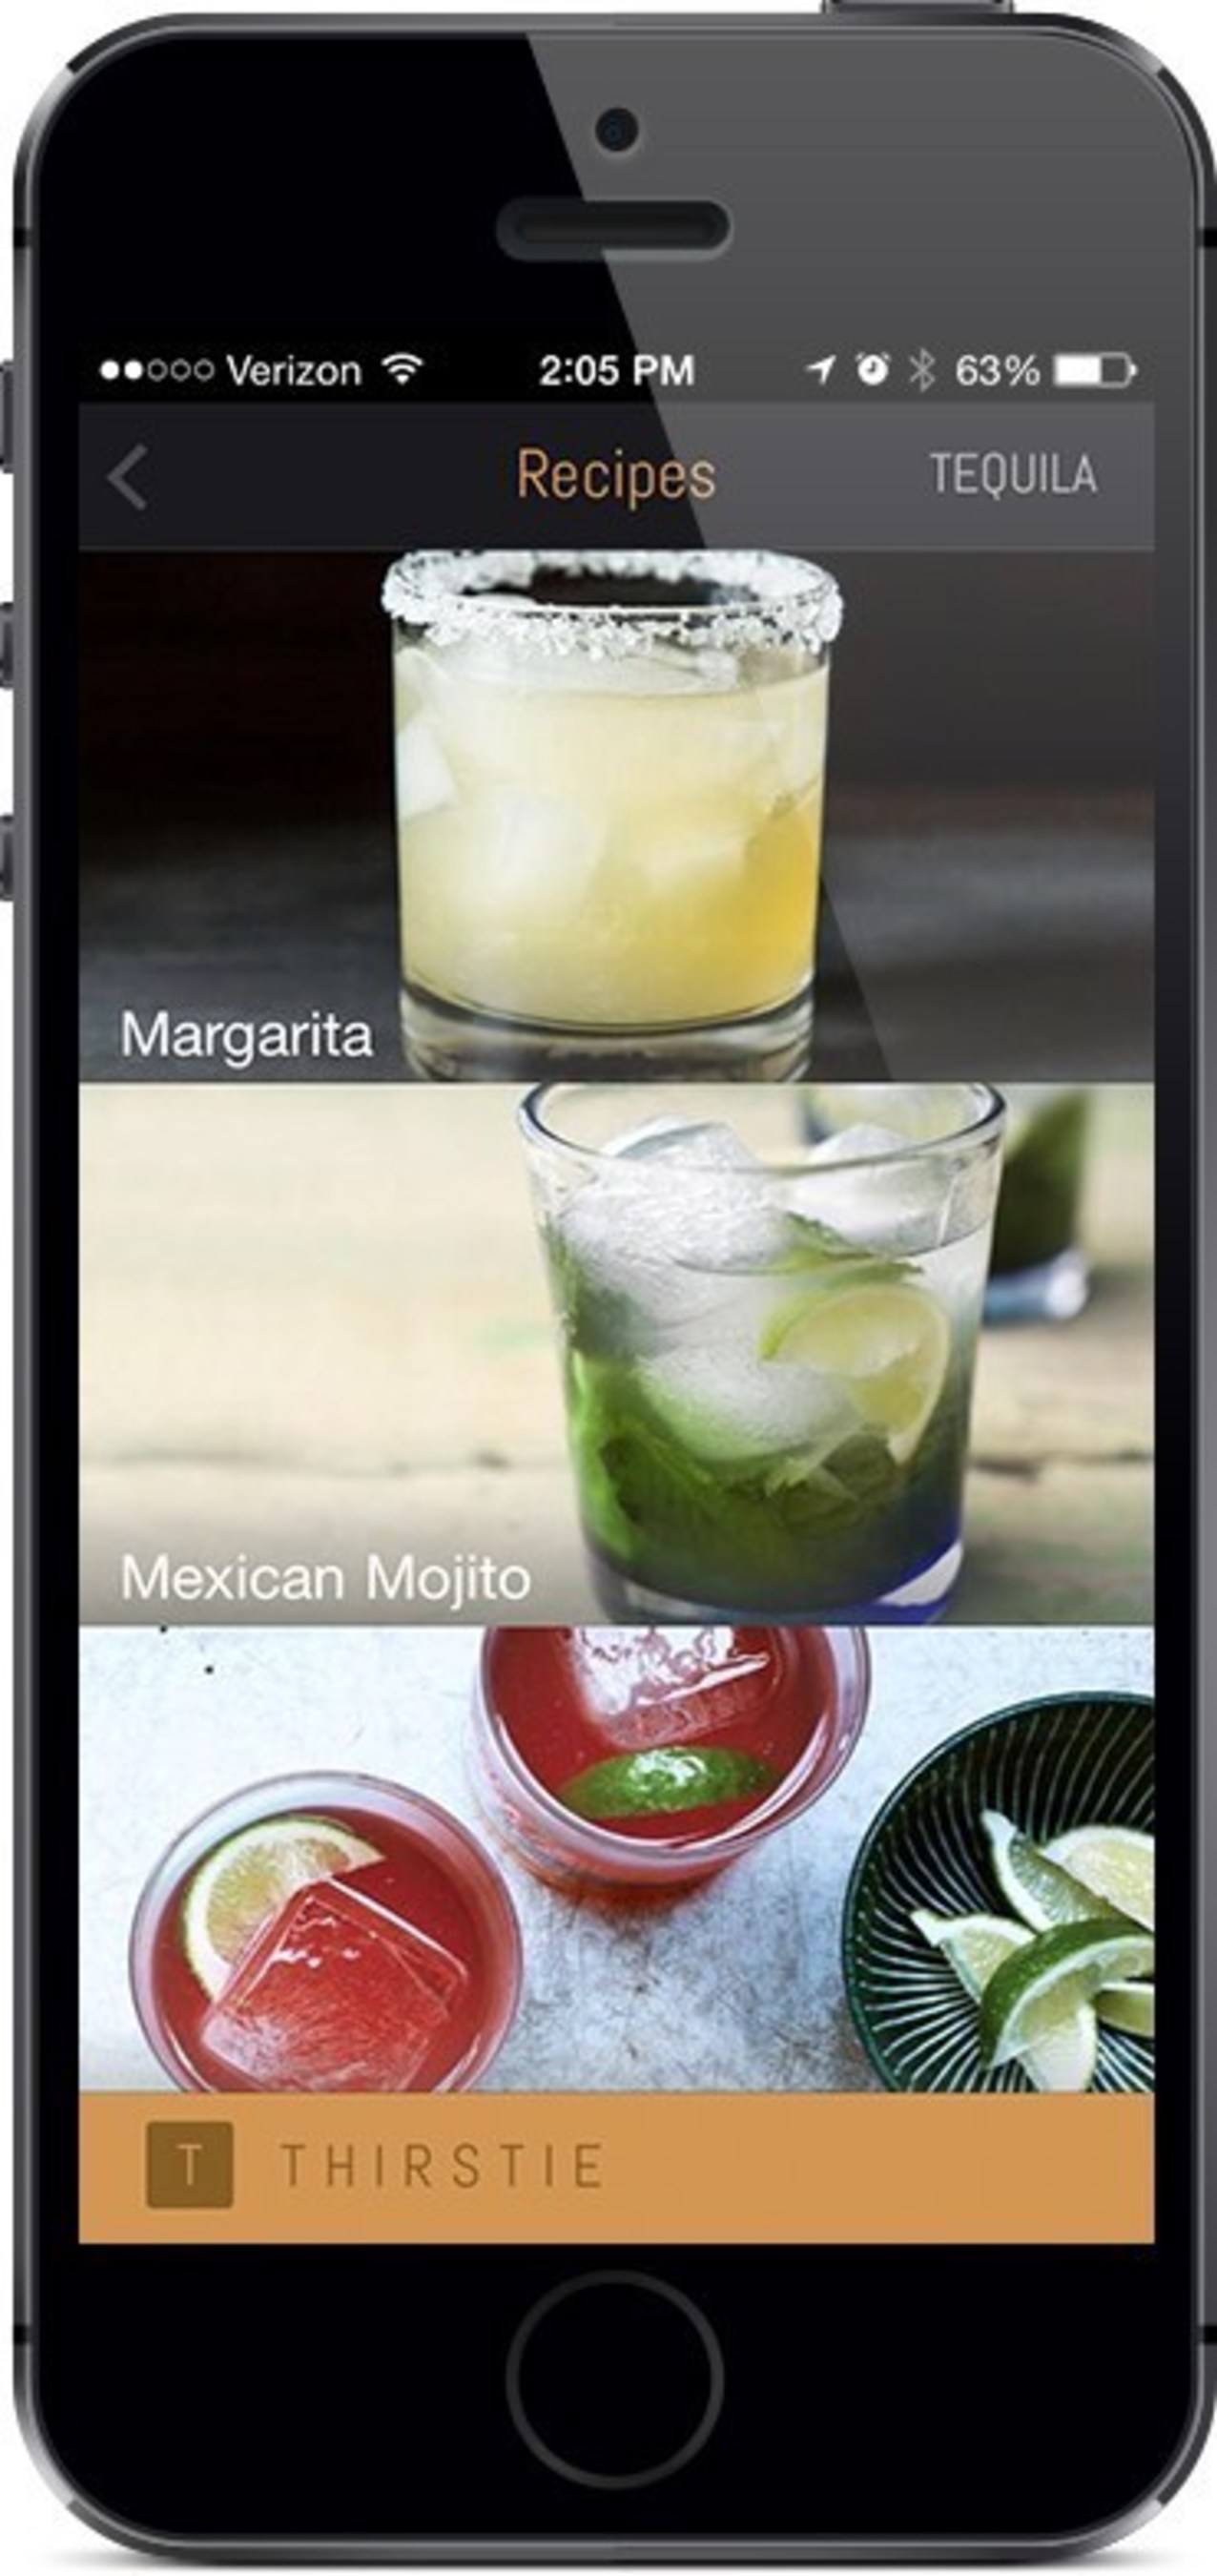 Thirstie Launches First In-App Cocktail Recipe Collection With Foodily (PRNewsFoto/Thirstie)